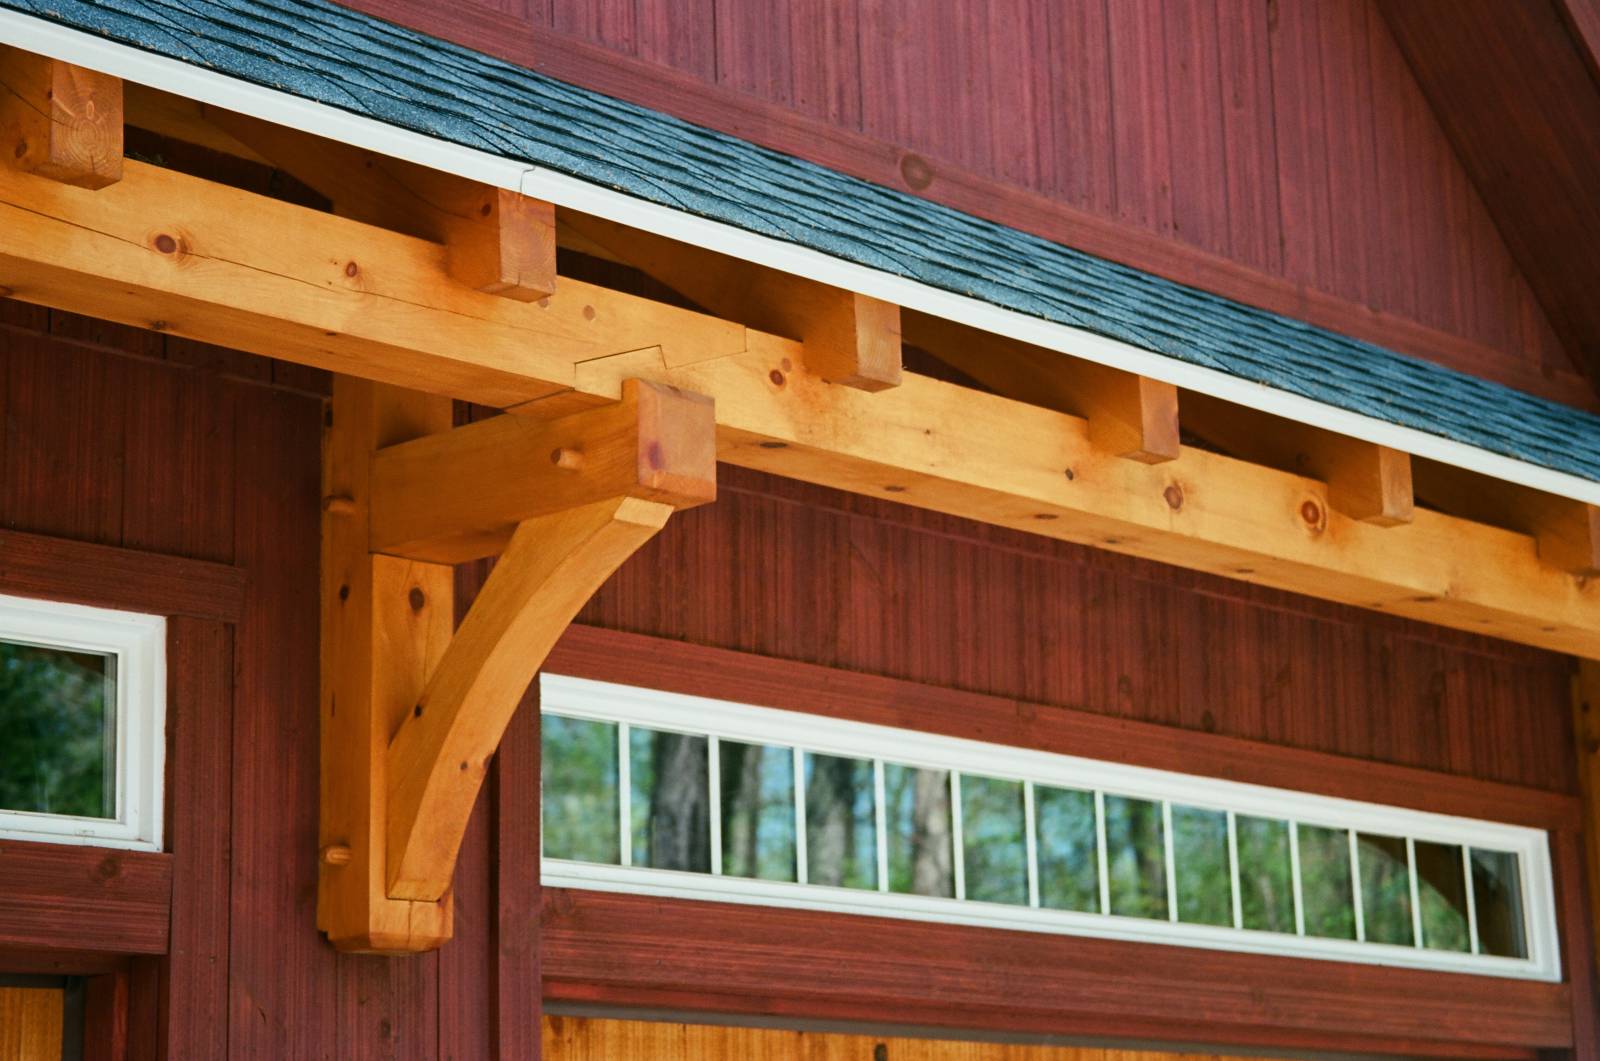 Timber frame eyebrow roof over the garage doors & transom windows